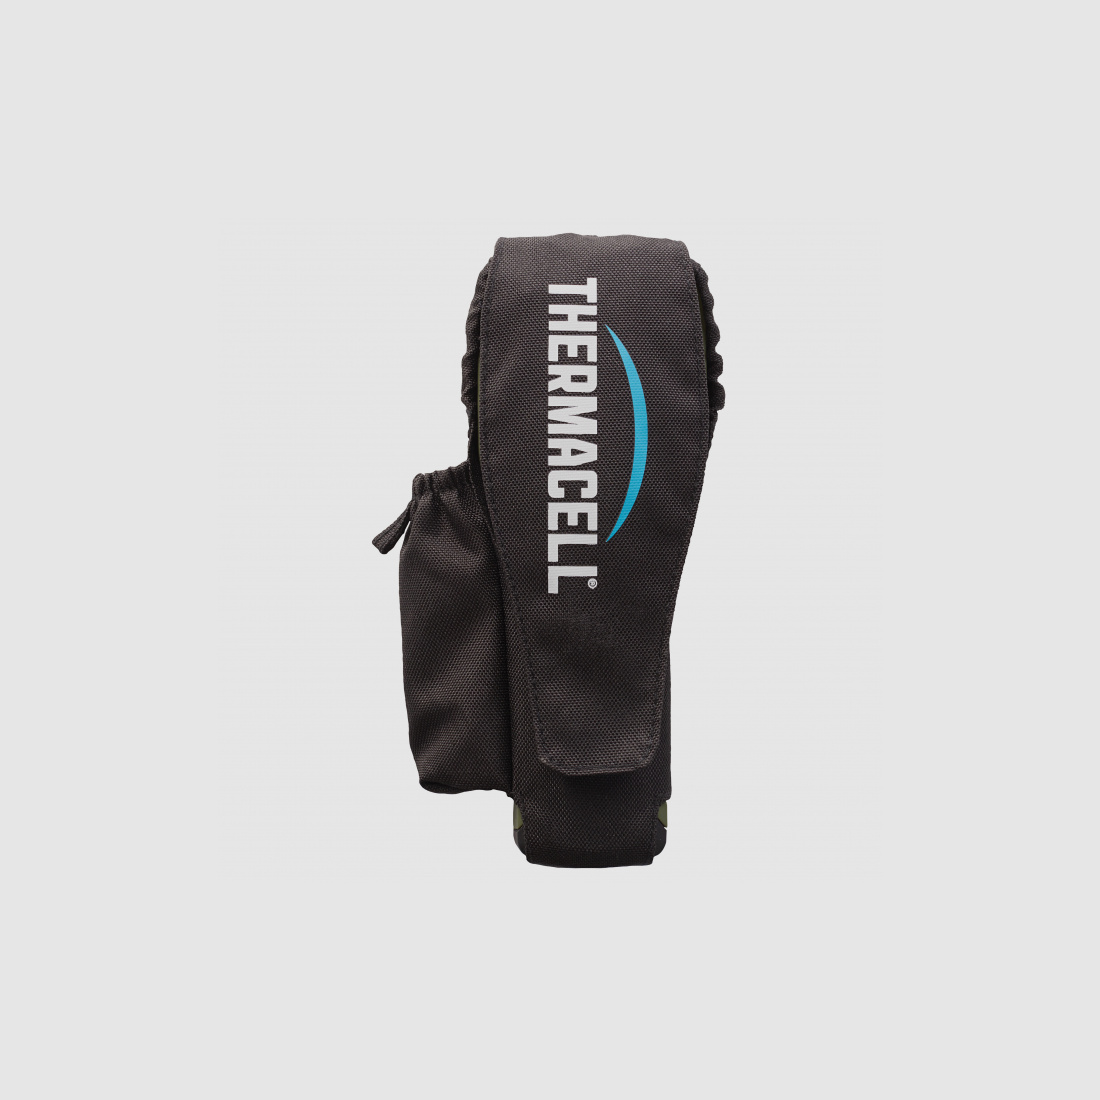 ThermaCell       ThermaCell   Holster für Handgeräte